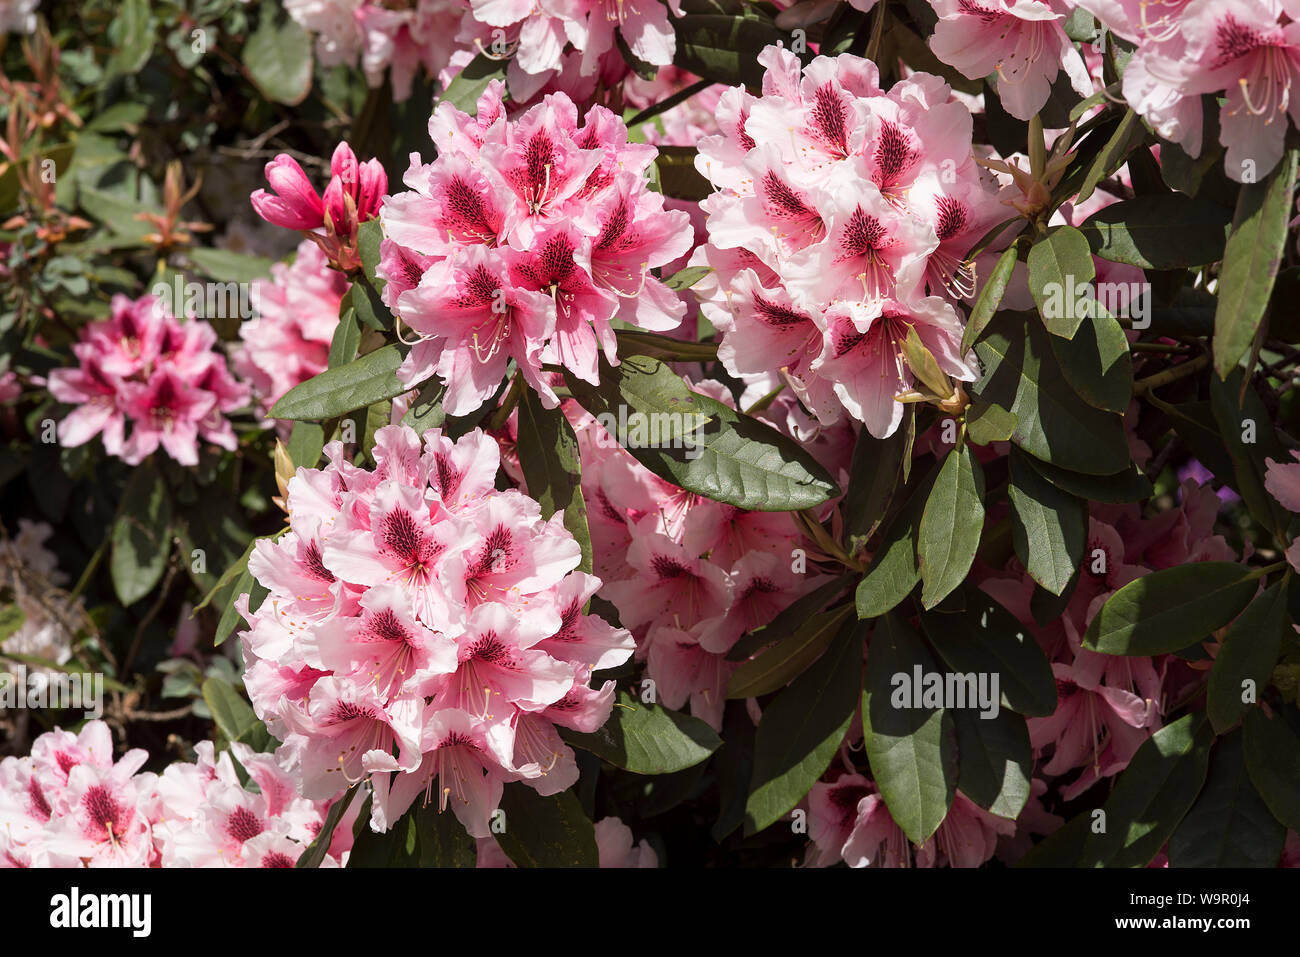 Pale pink rhododendrons with dark pink / burgundy spotted markings. Stock Photo